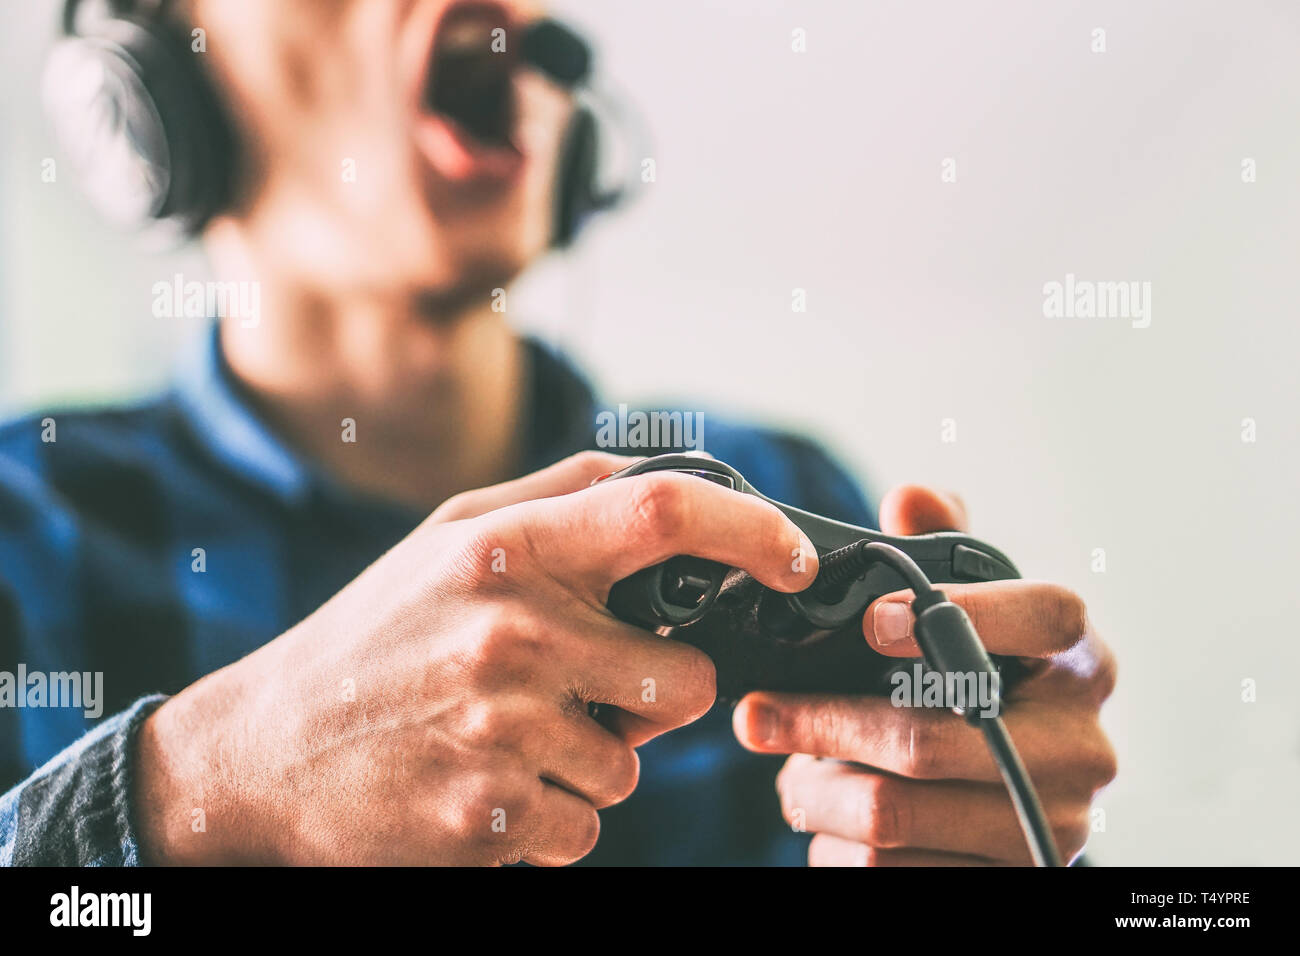 Young man having fun playing video games online using headphones and microphone - Close up male hands gamer holding a joystick - Vintage filter Stock Photo